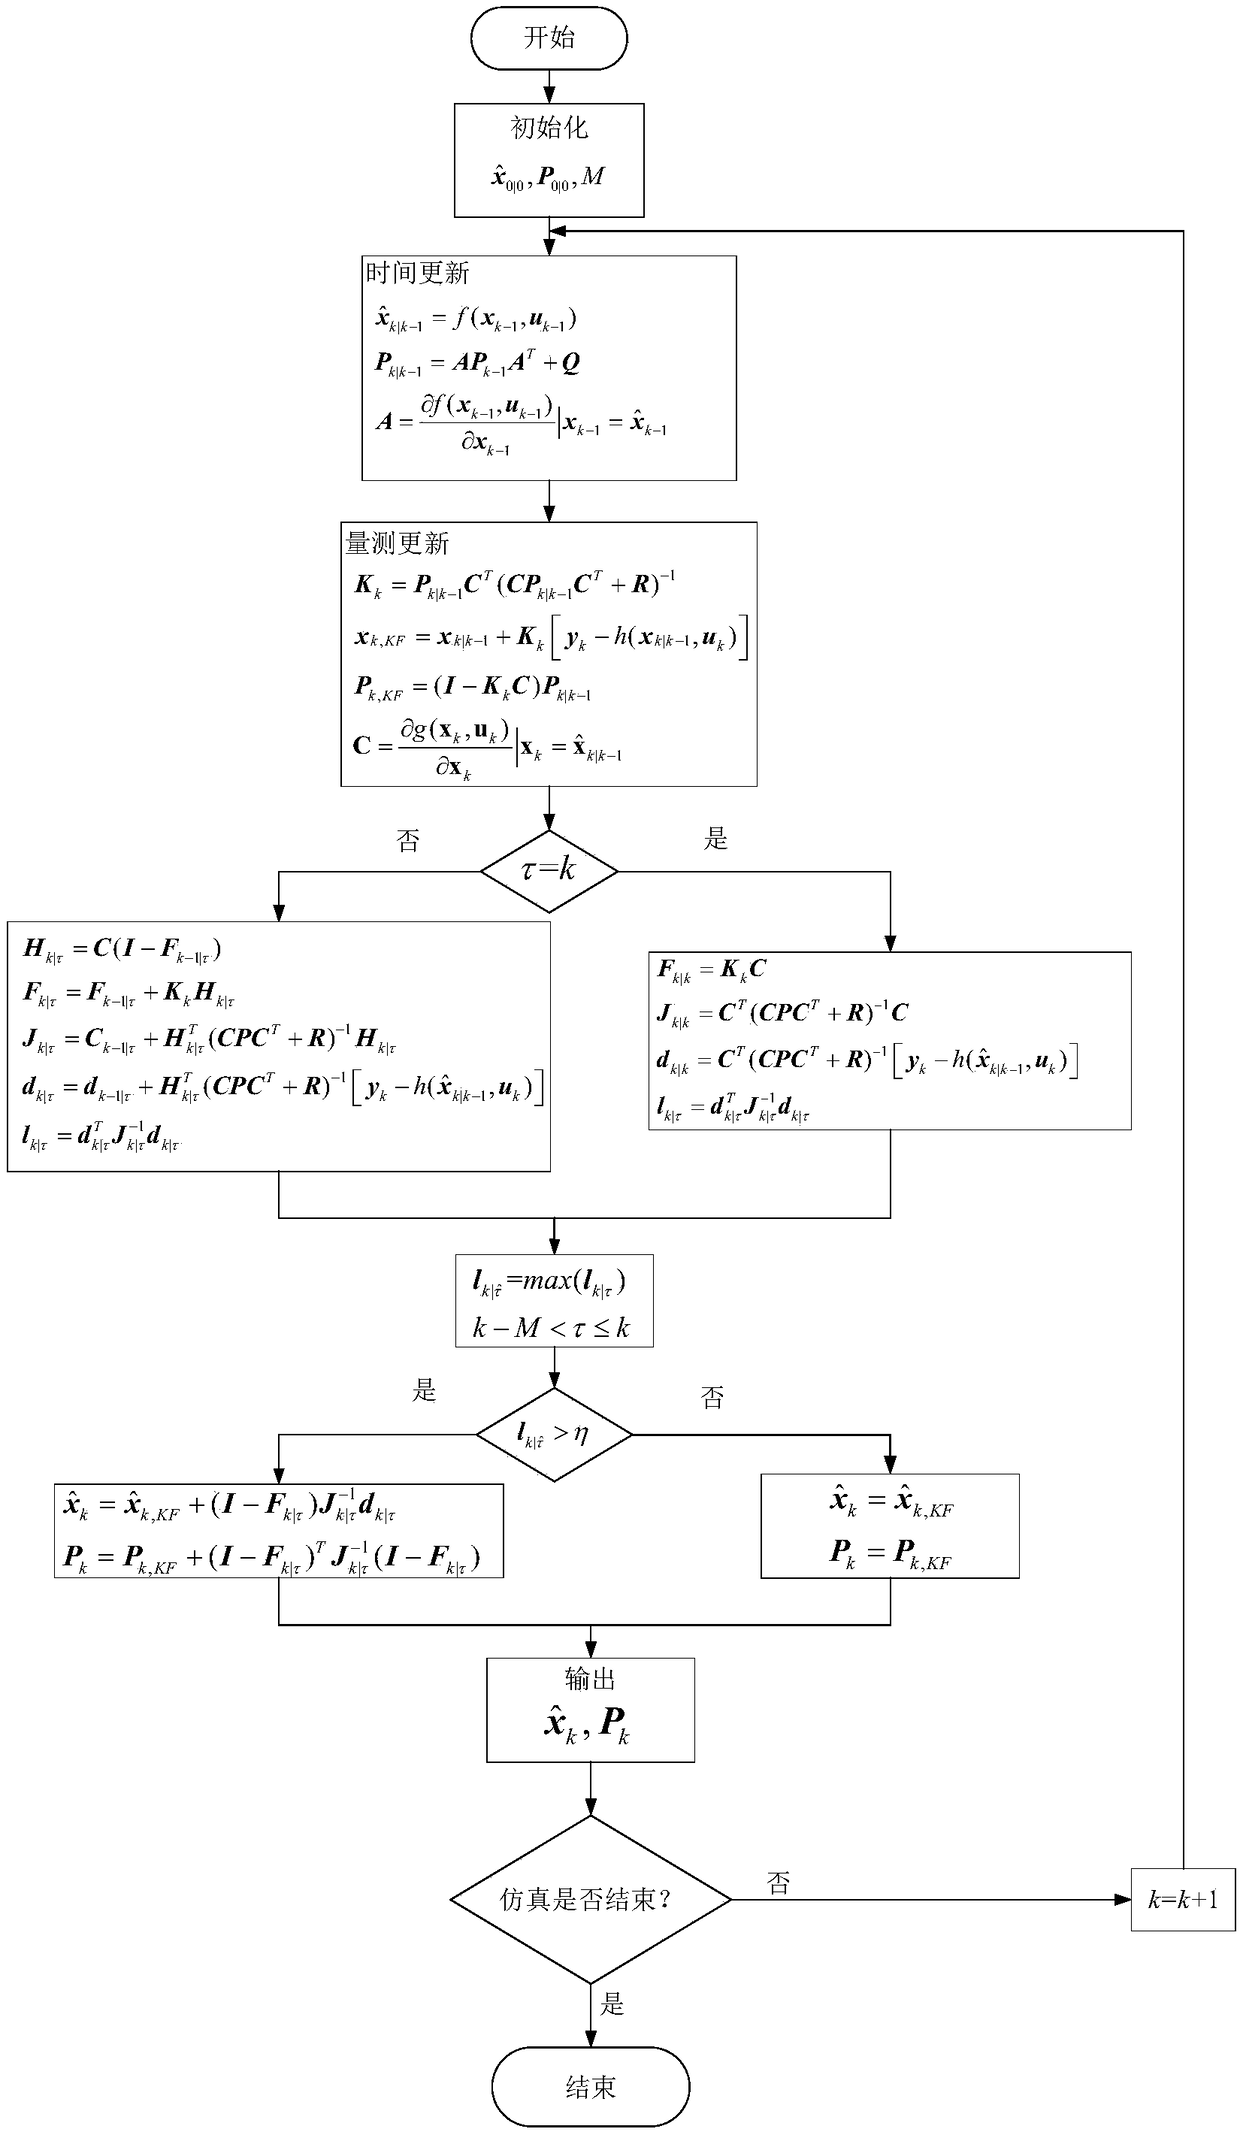 A method for construct an adaptive component level simulation model of a variable cycle engine